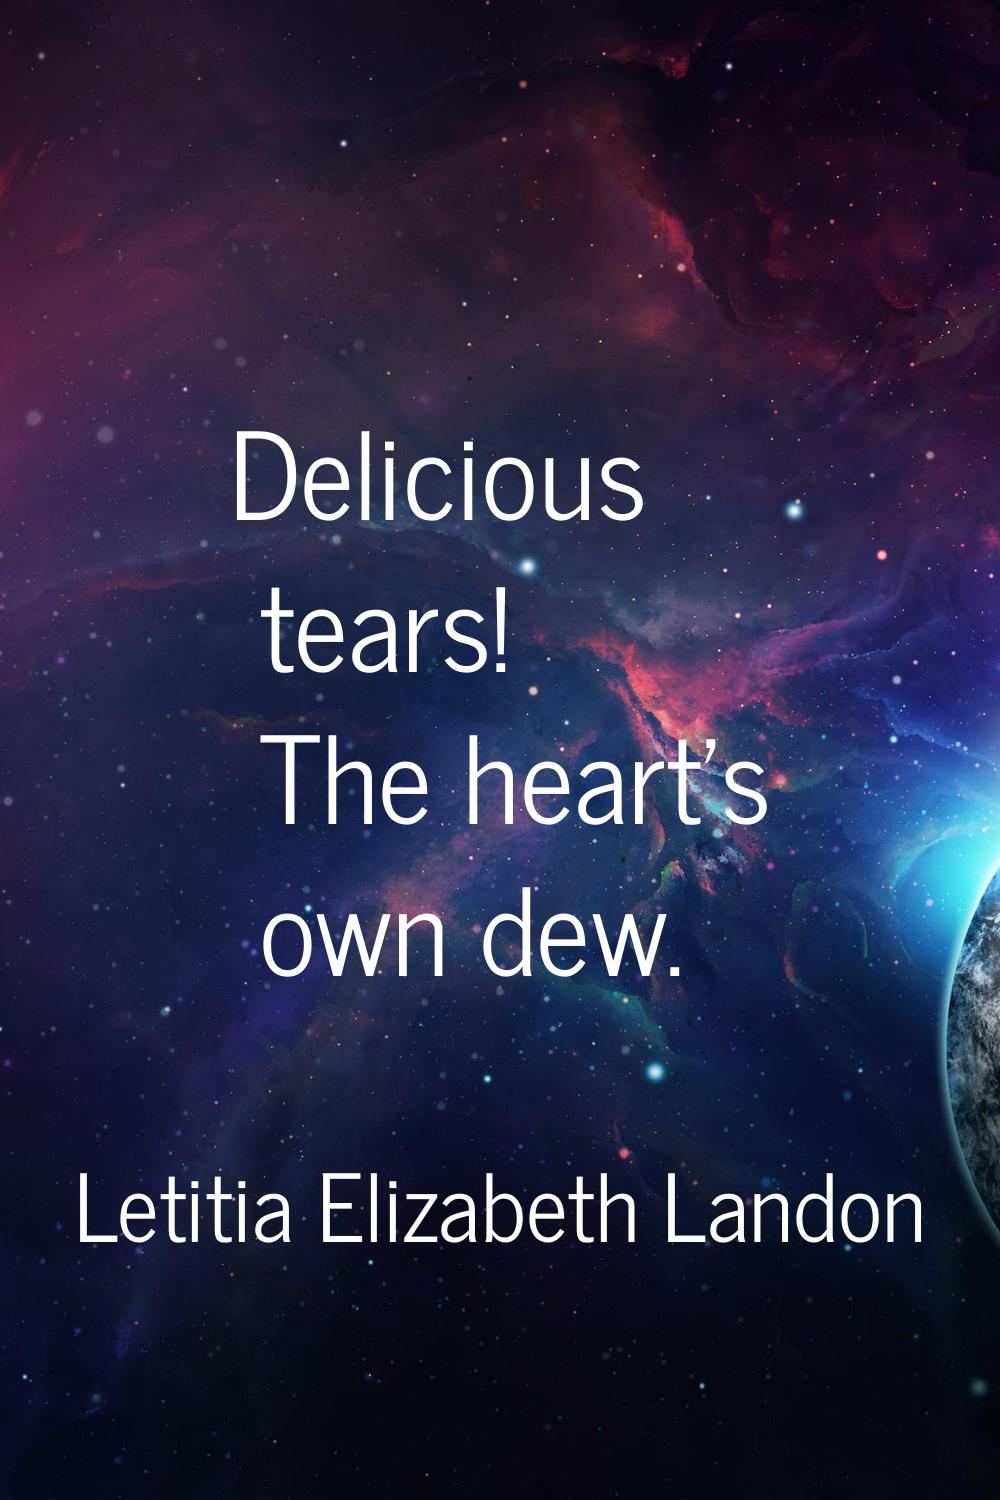 Delicious tears! The heart's own dew.